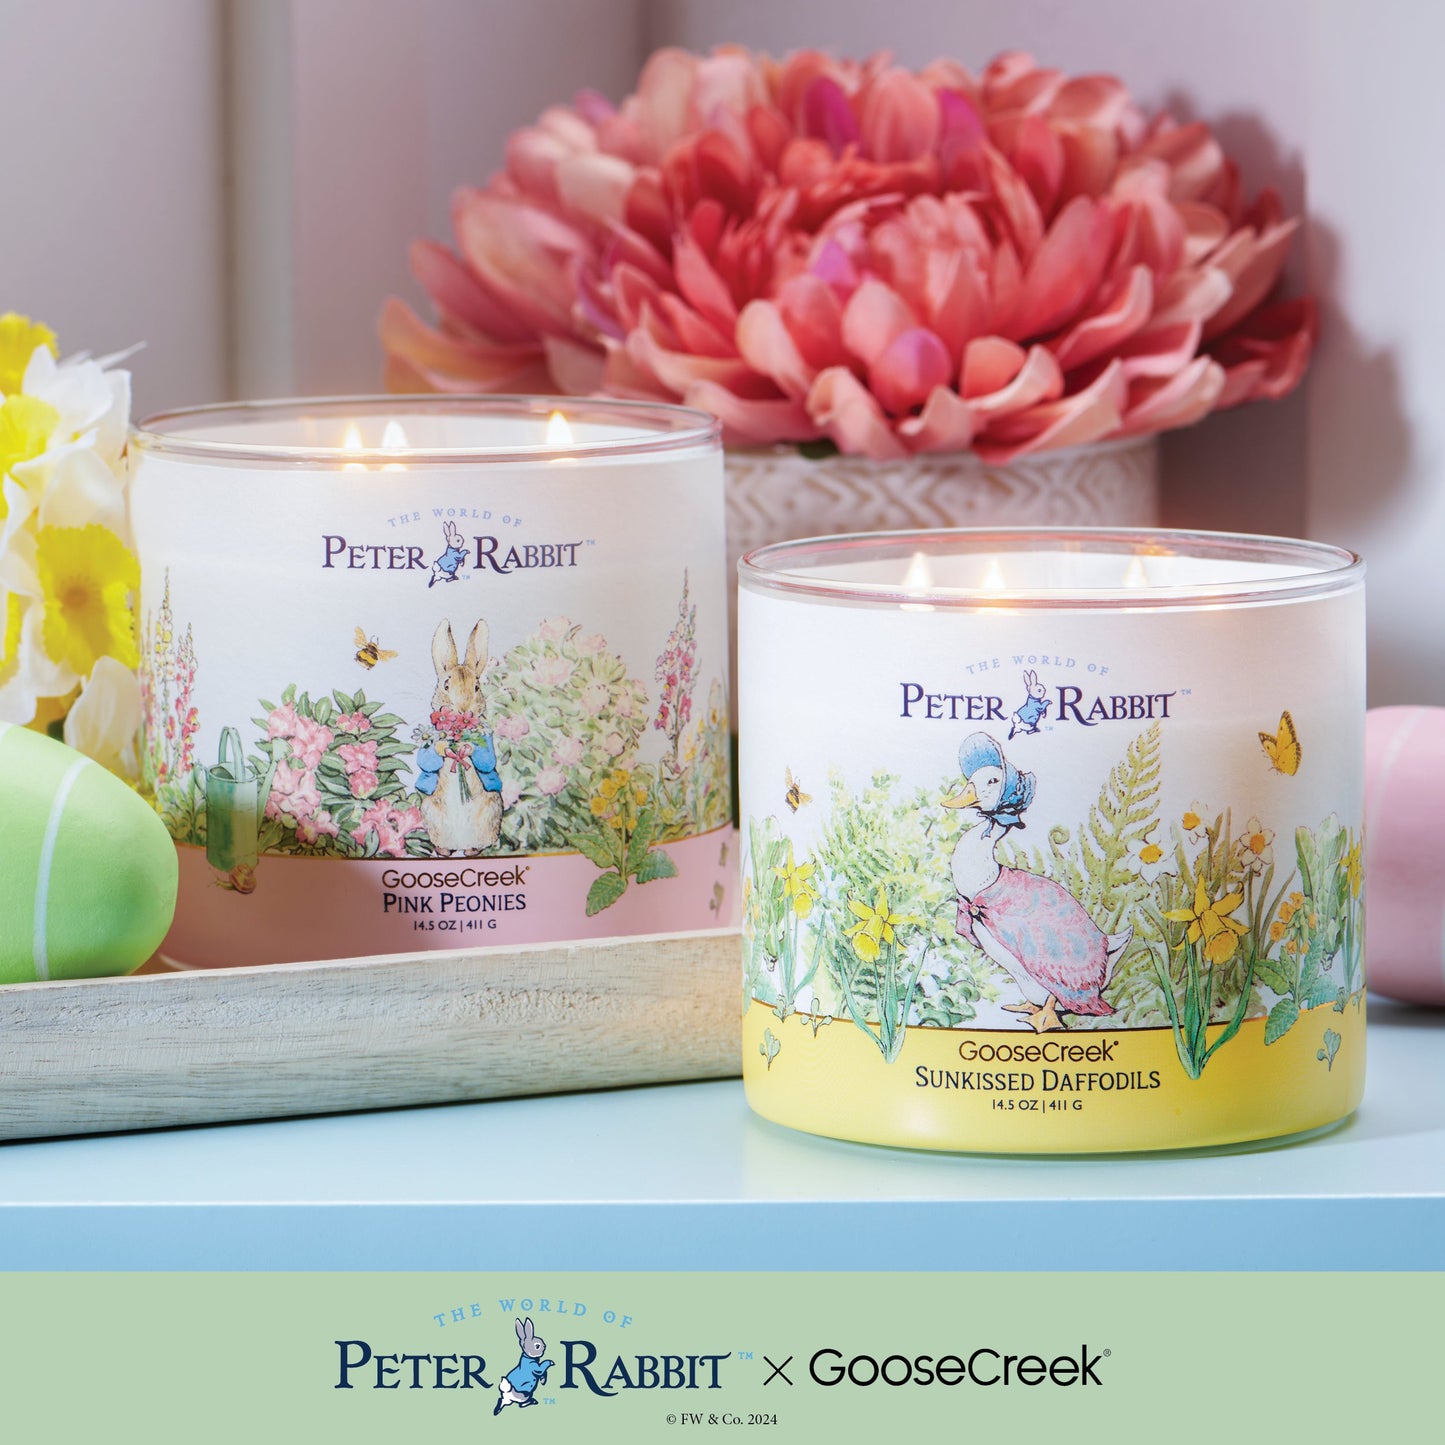 Peter Rabbit - Sunkissed Daffodils Large 3-Wick Candle